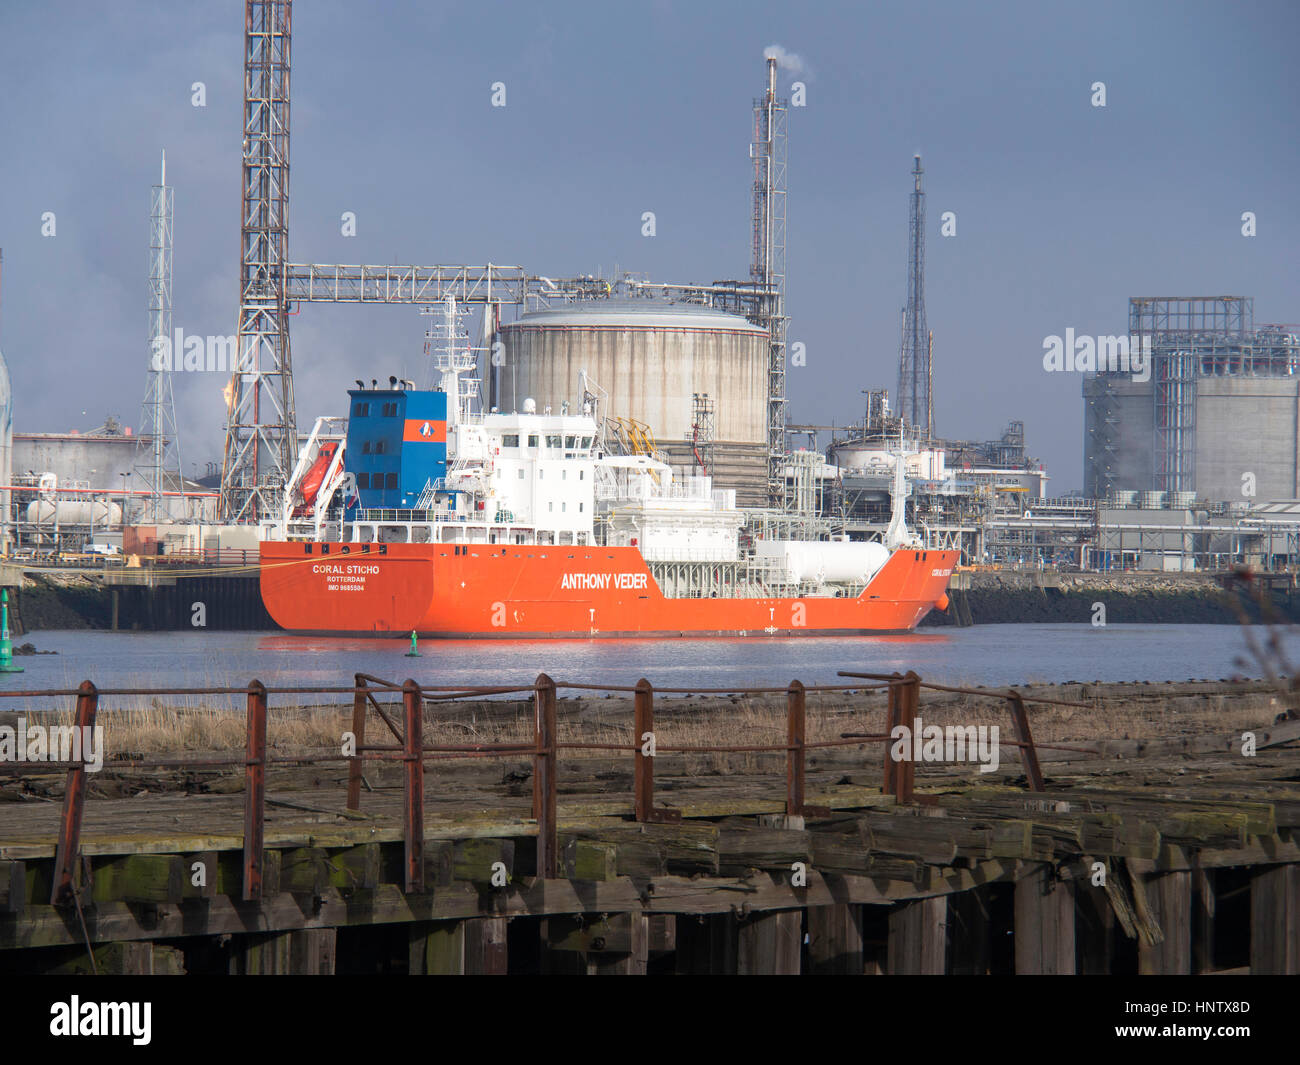 LPG Tanker  Coral Sticho, IMO number  9685504 moored at the oil refinery on the River Tees England UK Stock Photo